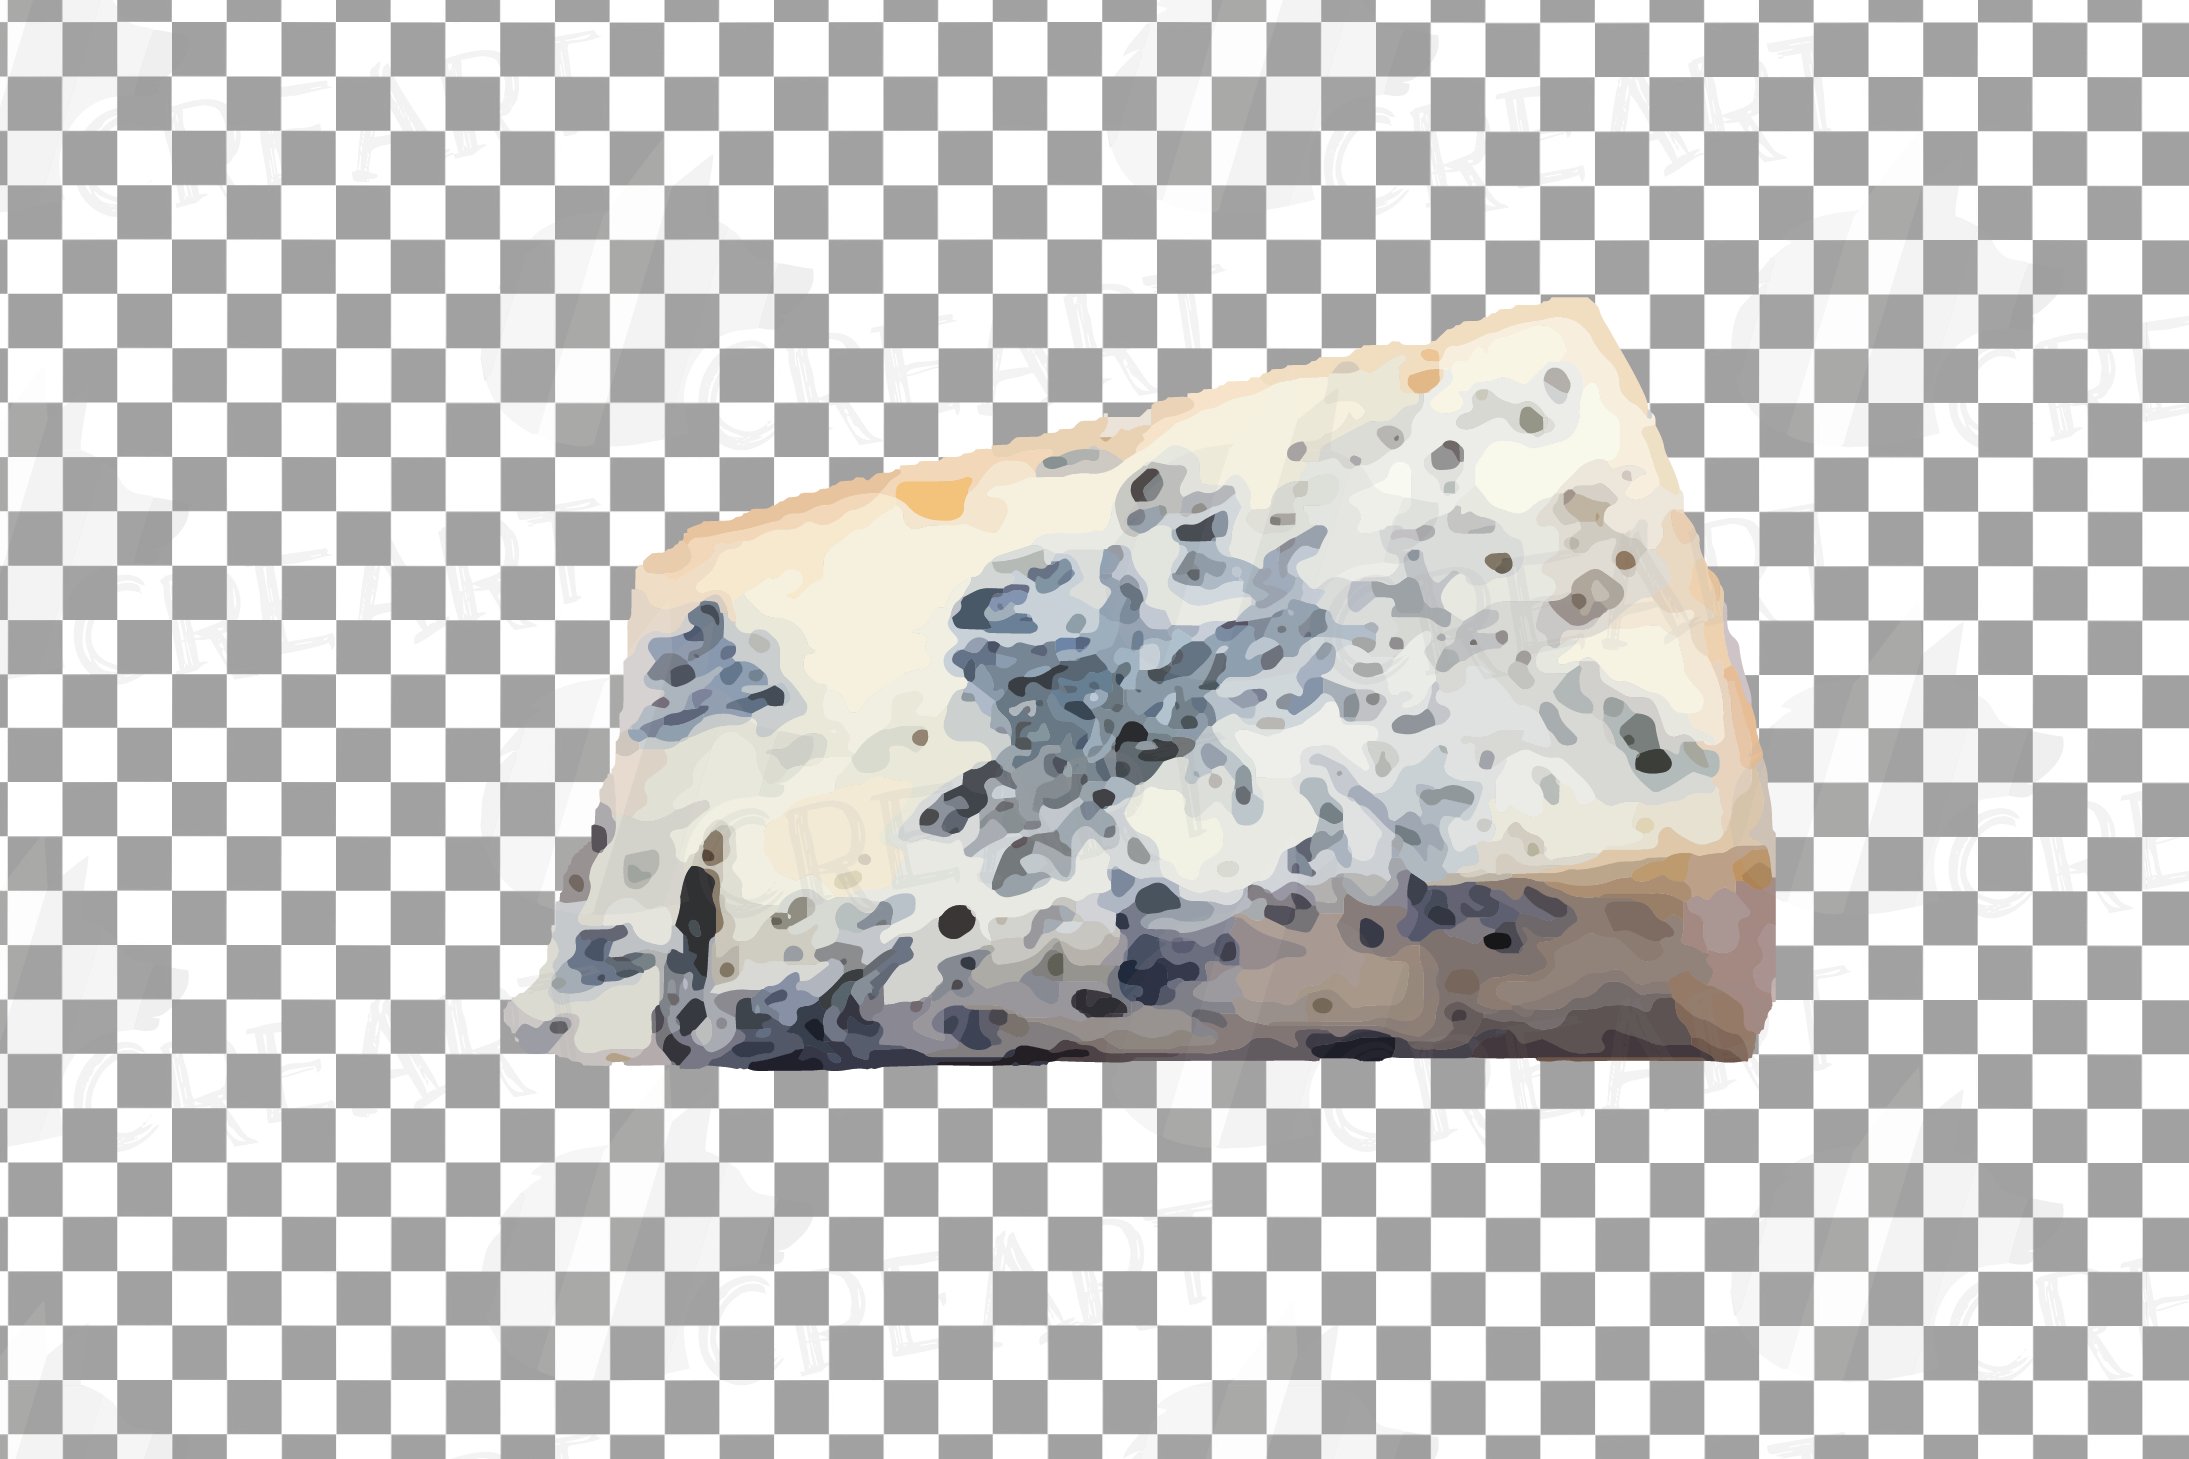 Colorful image of blue cheese on a transparent background.